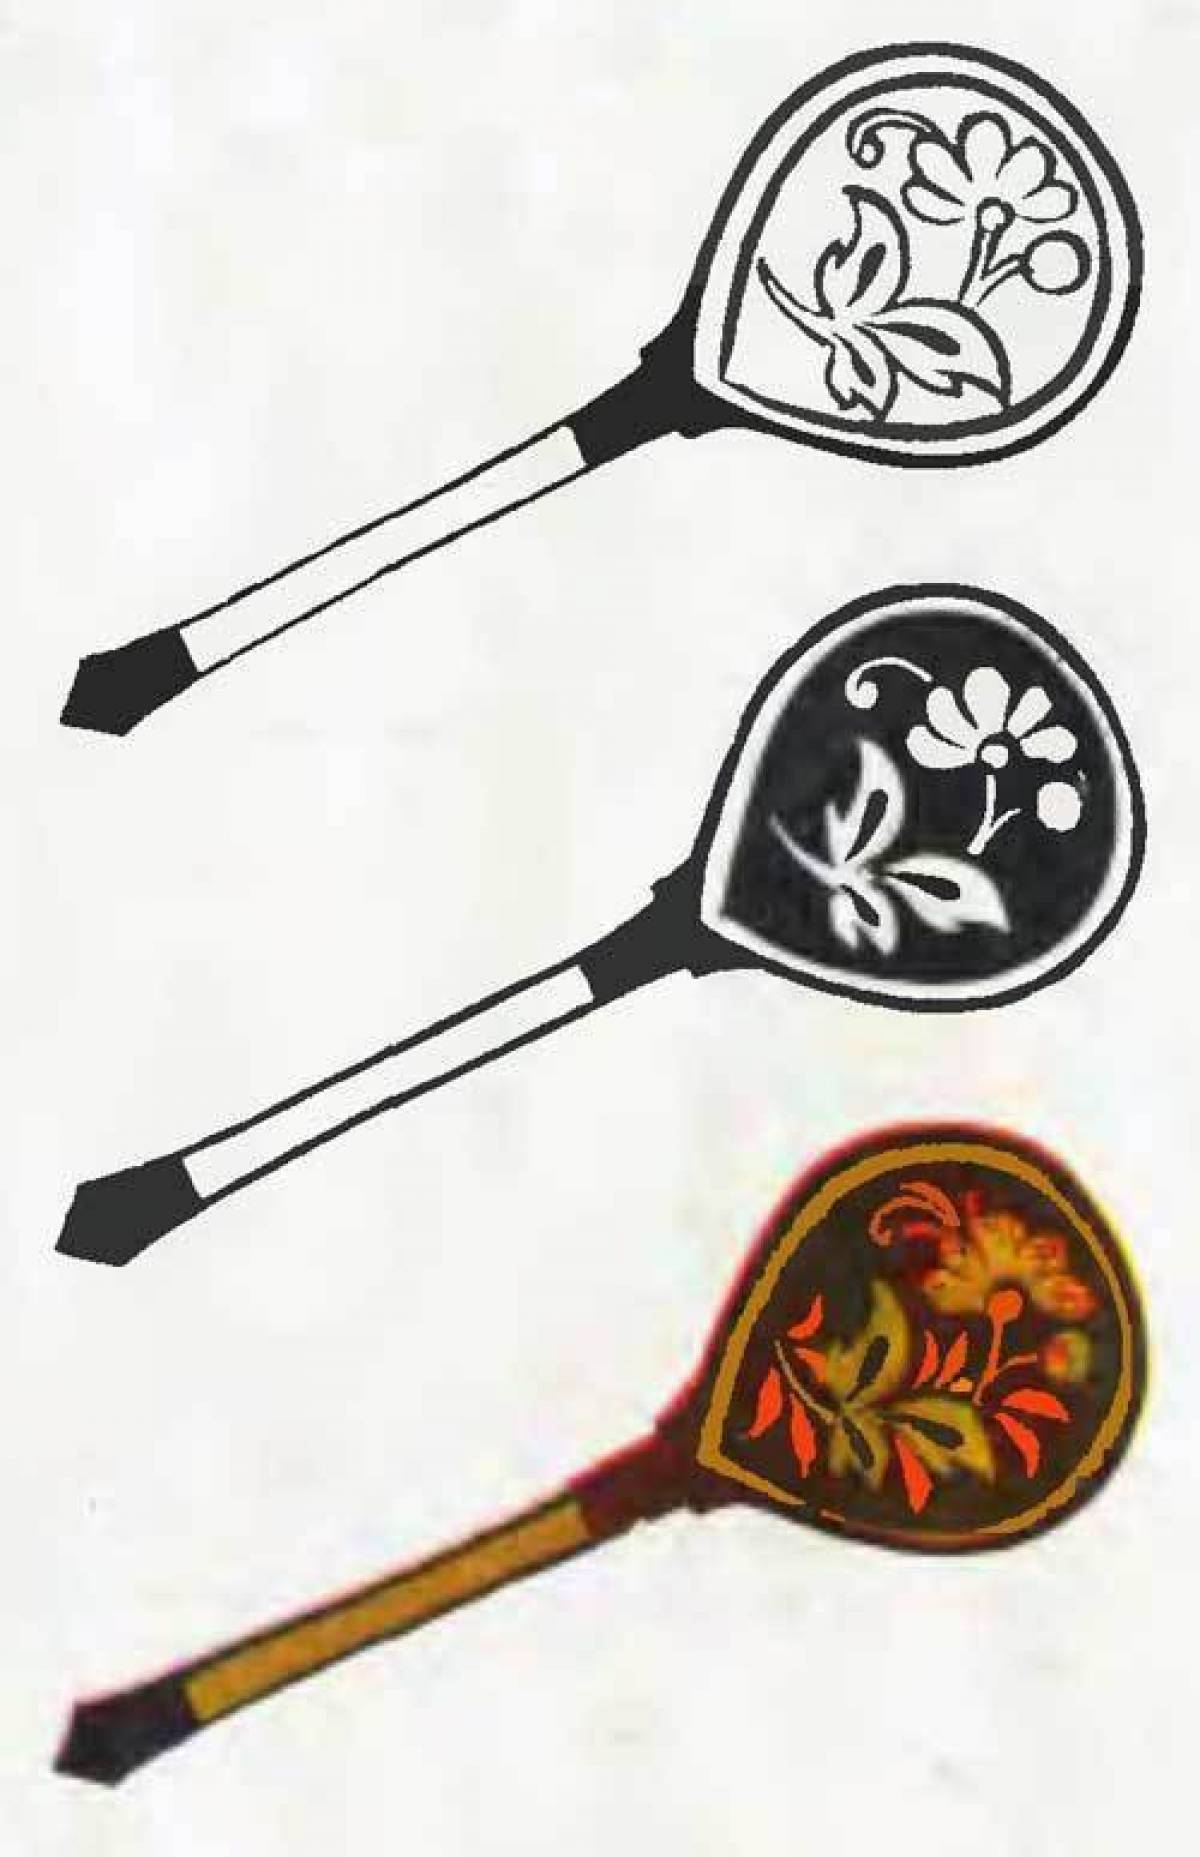 Fun coloring of a wooden spoon